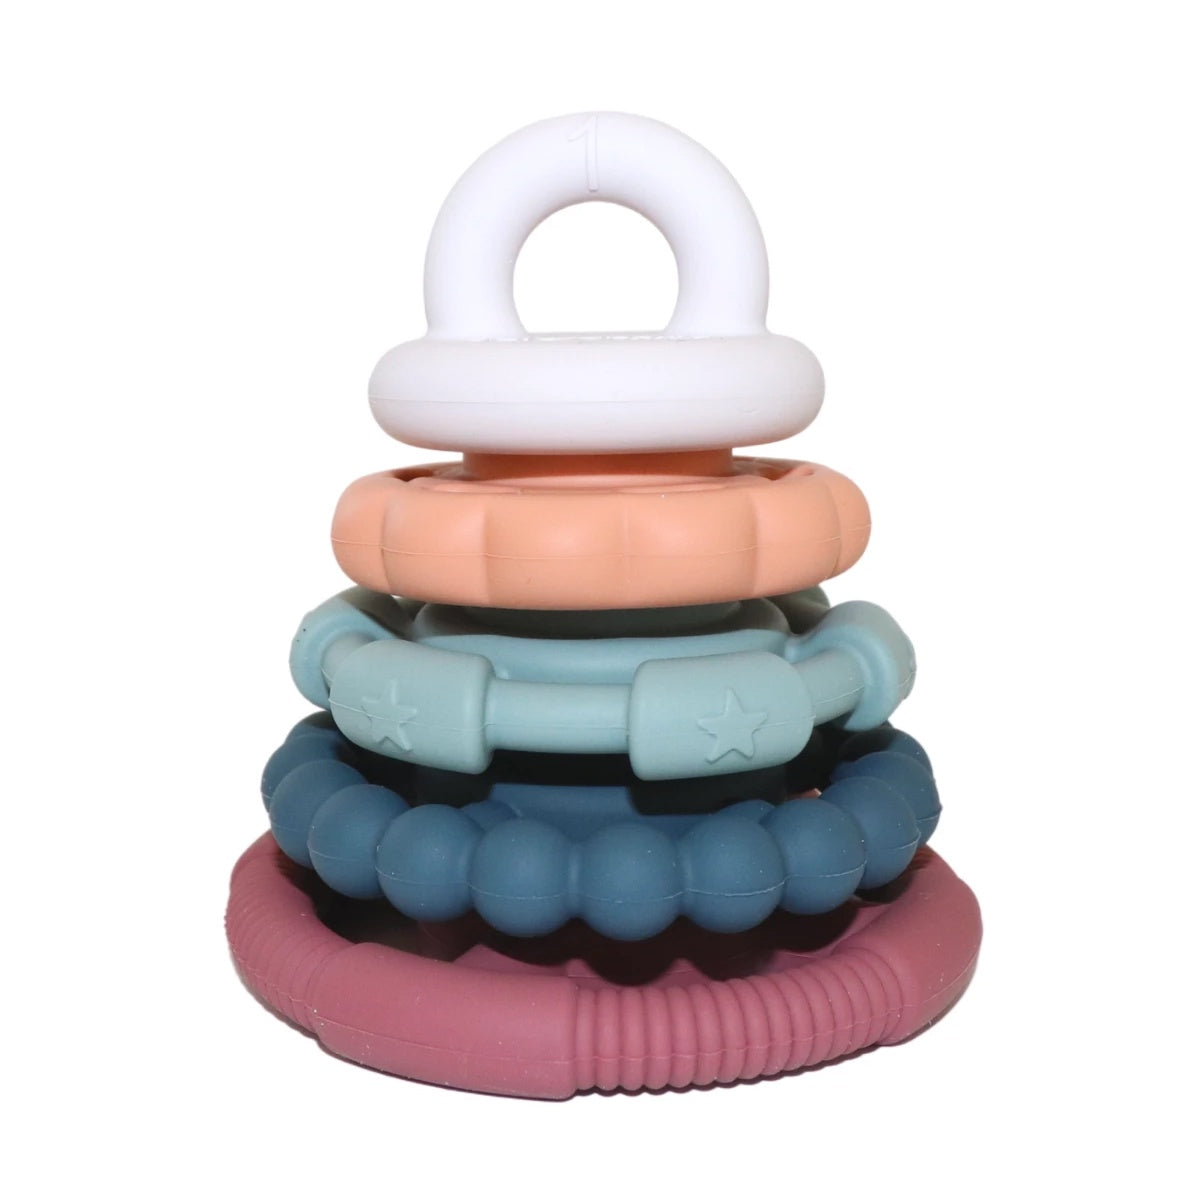 Jellystone Rainbow Stacker and Teether Toy - Earth